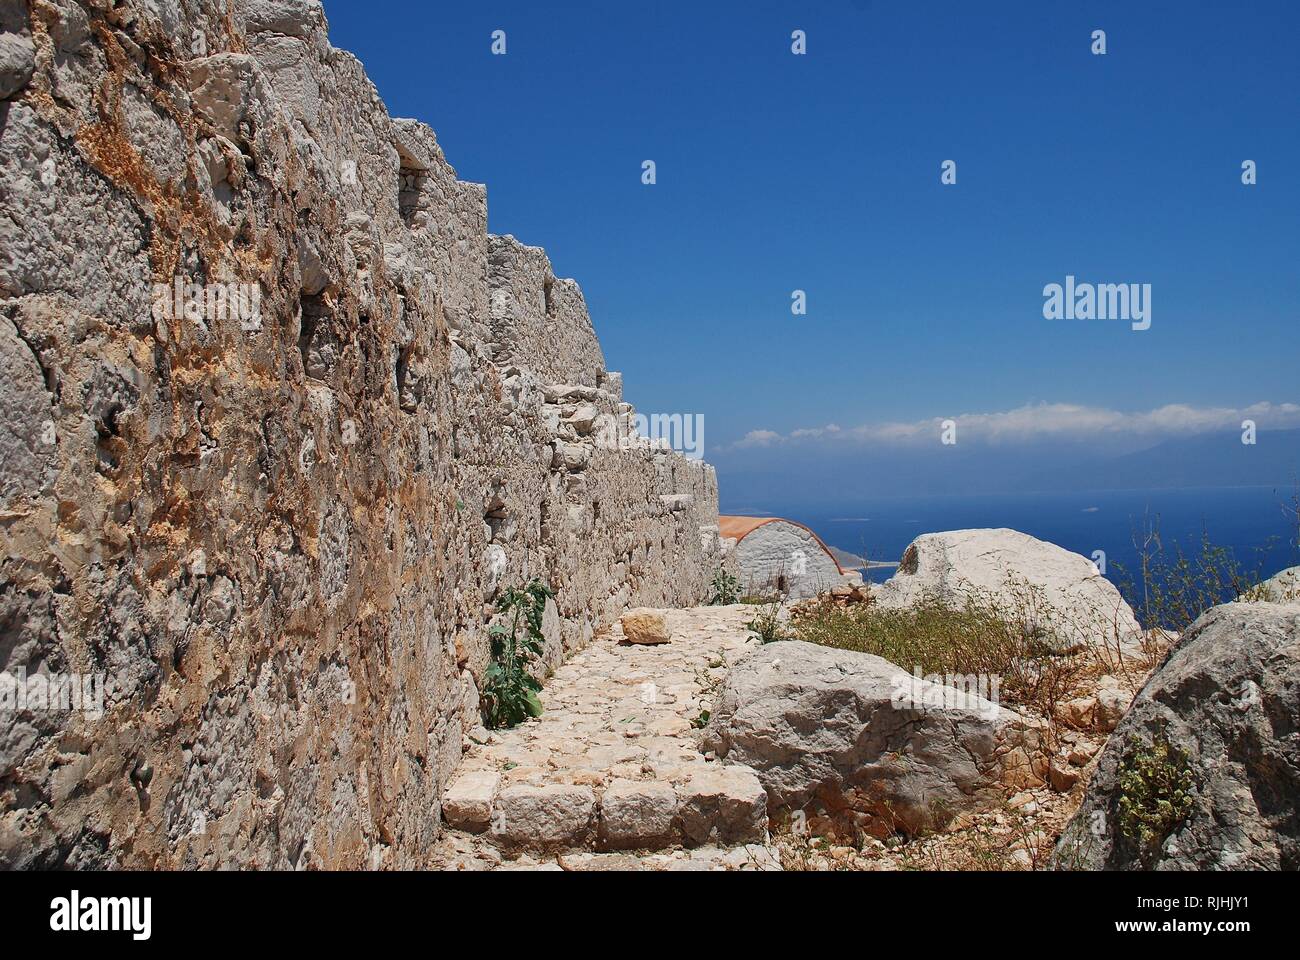 The remains of the medieval Crusader Knights castle above Chorio on the Greek island of Halki. Stock Photo